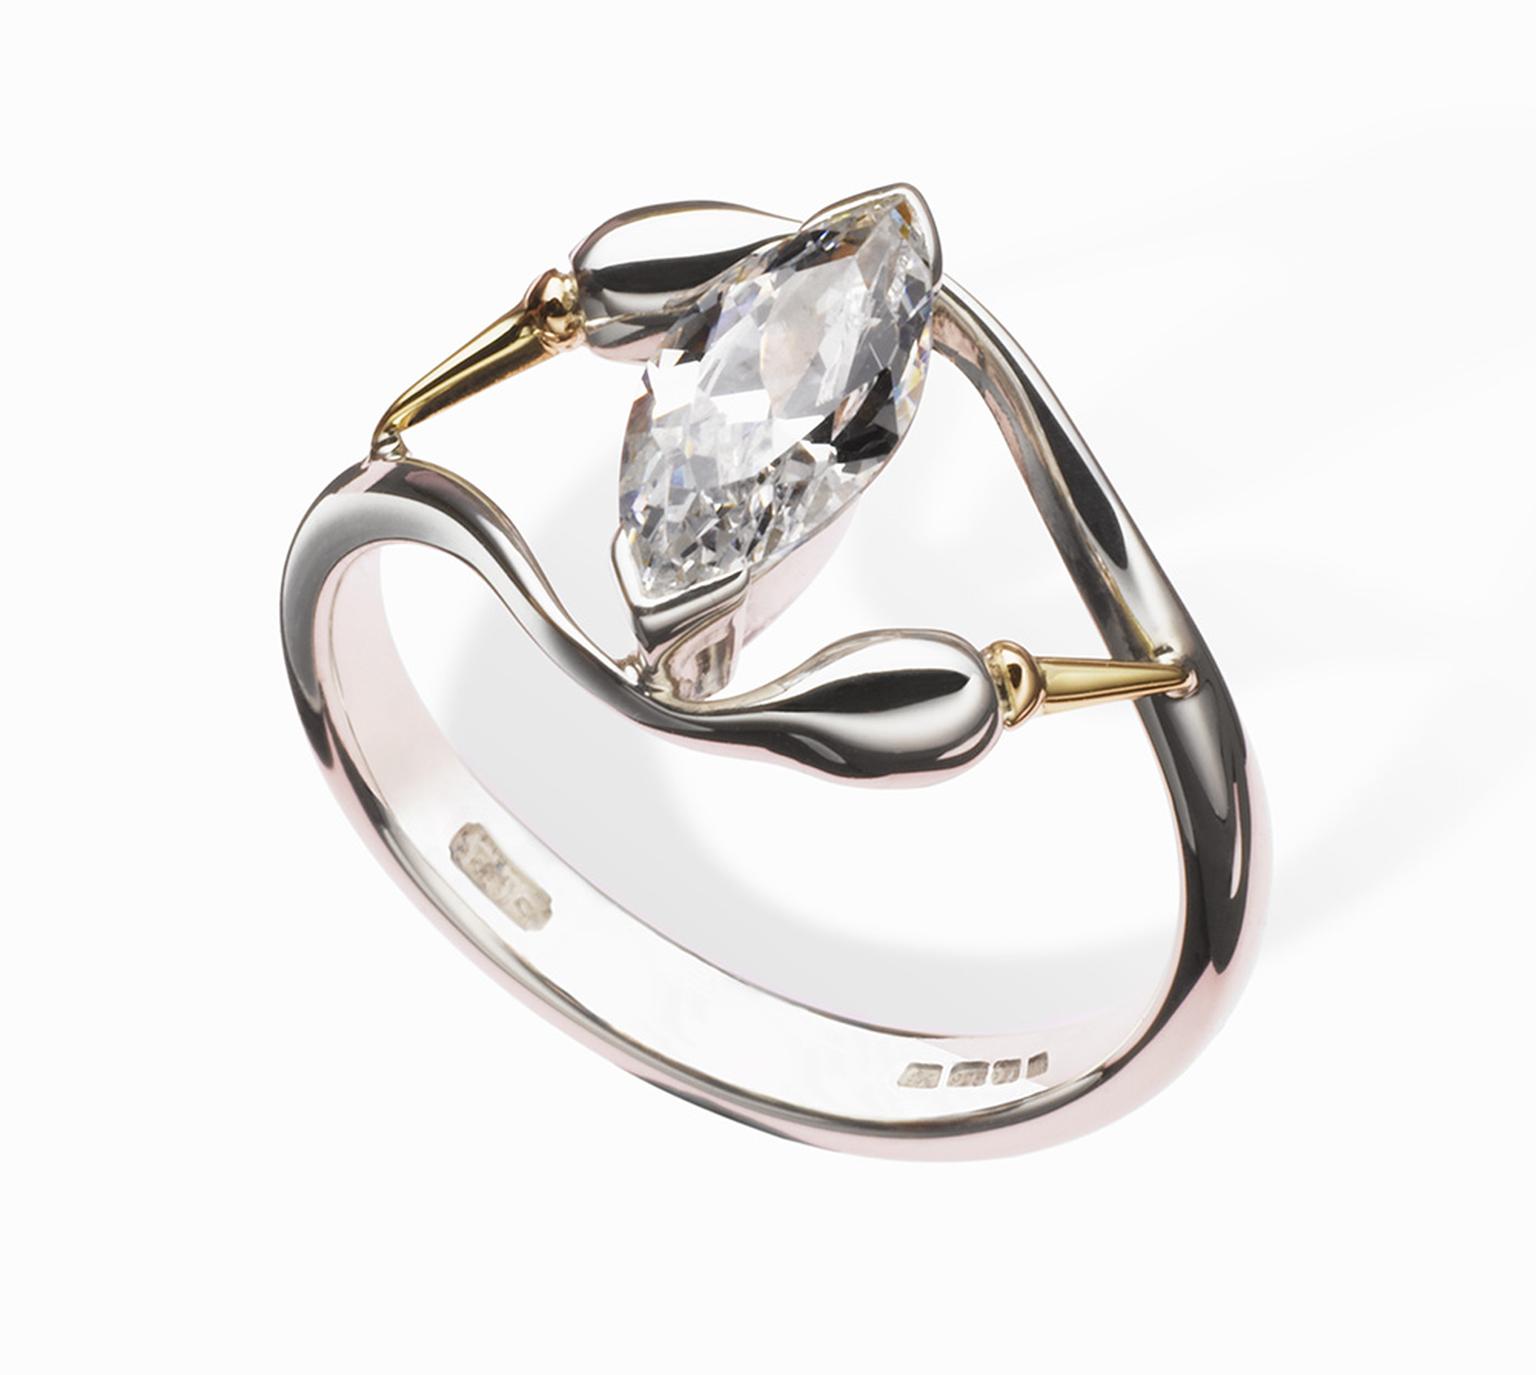 Erica Sharpe Swan ring in 18ct Fairtrade/ Fairmined gold (£1,190; stone extra)